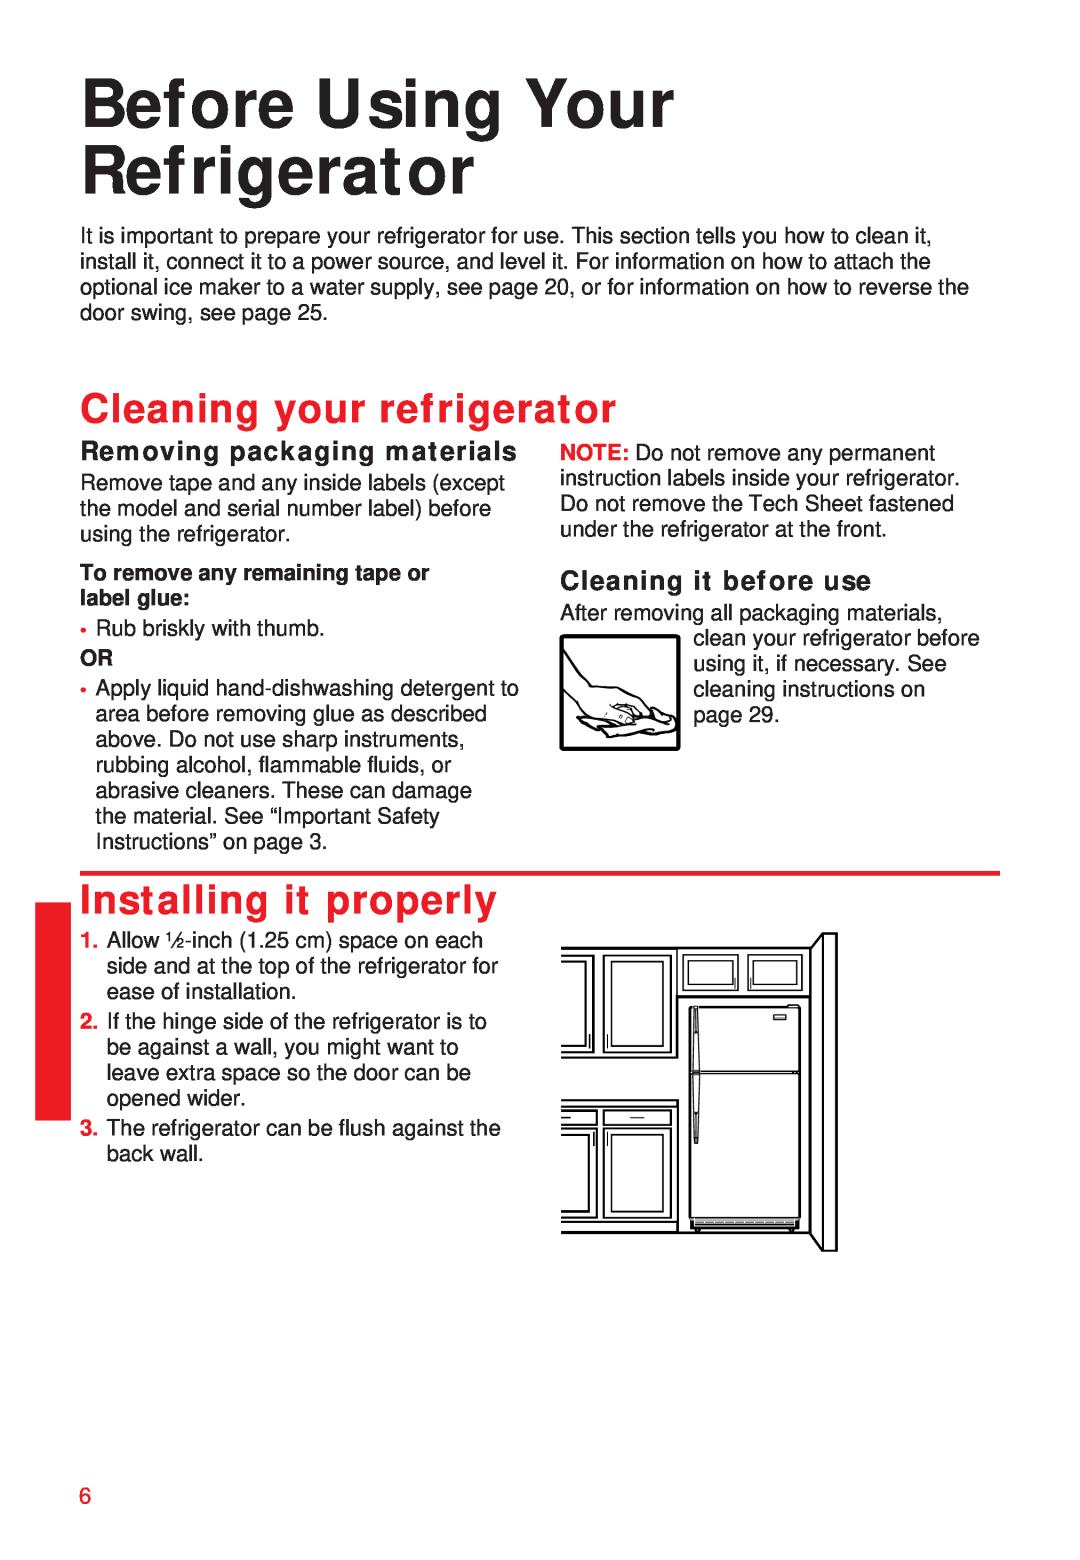 Whirlpool 2195258 manual Before Using Your Refrigerator, Cleaning your refrigerator, Installing it properly 